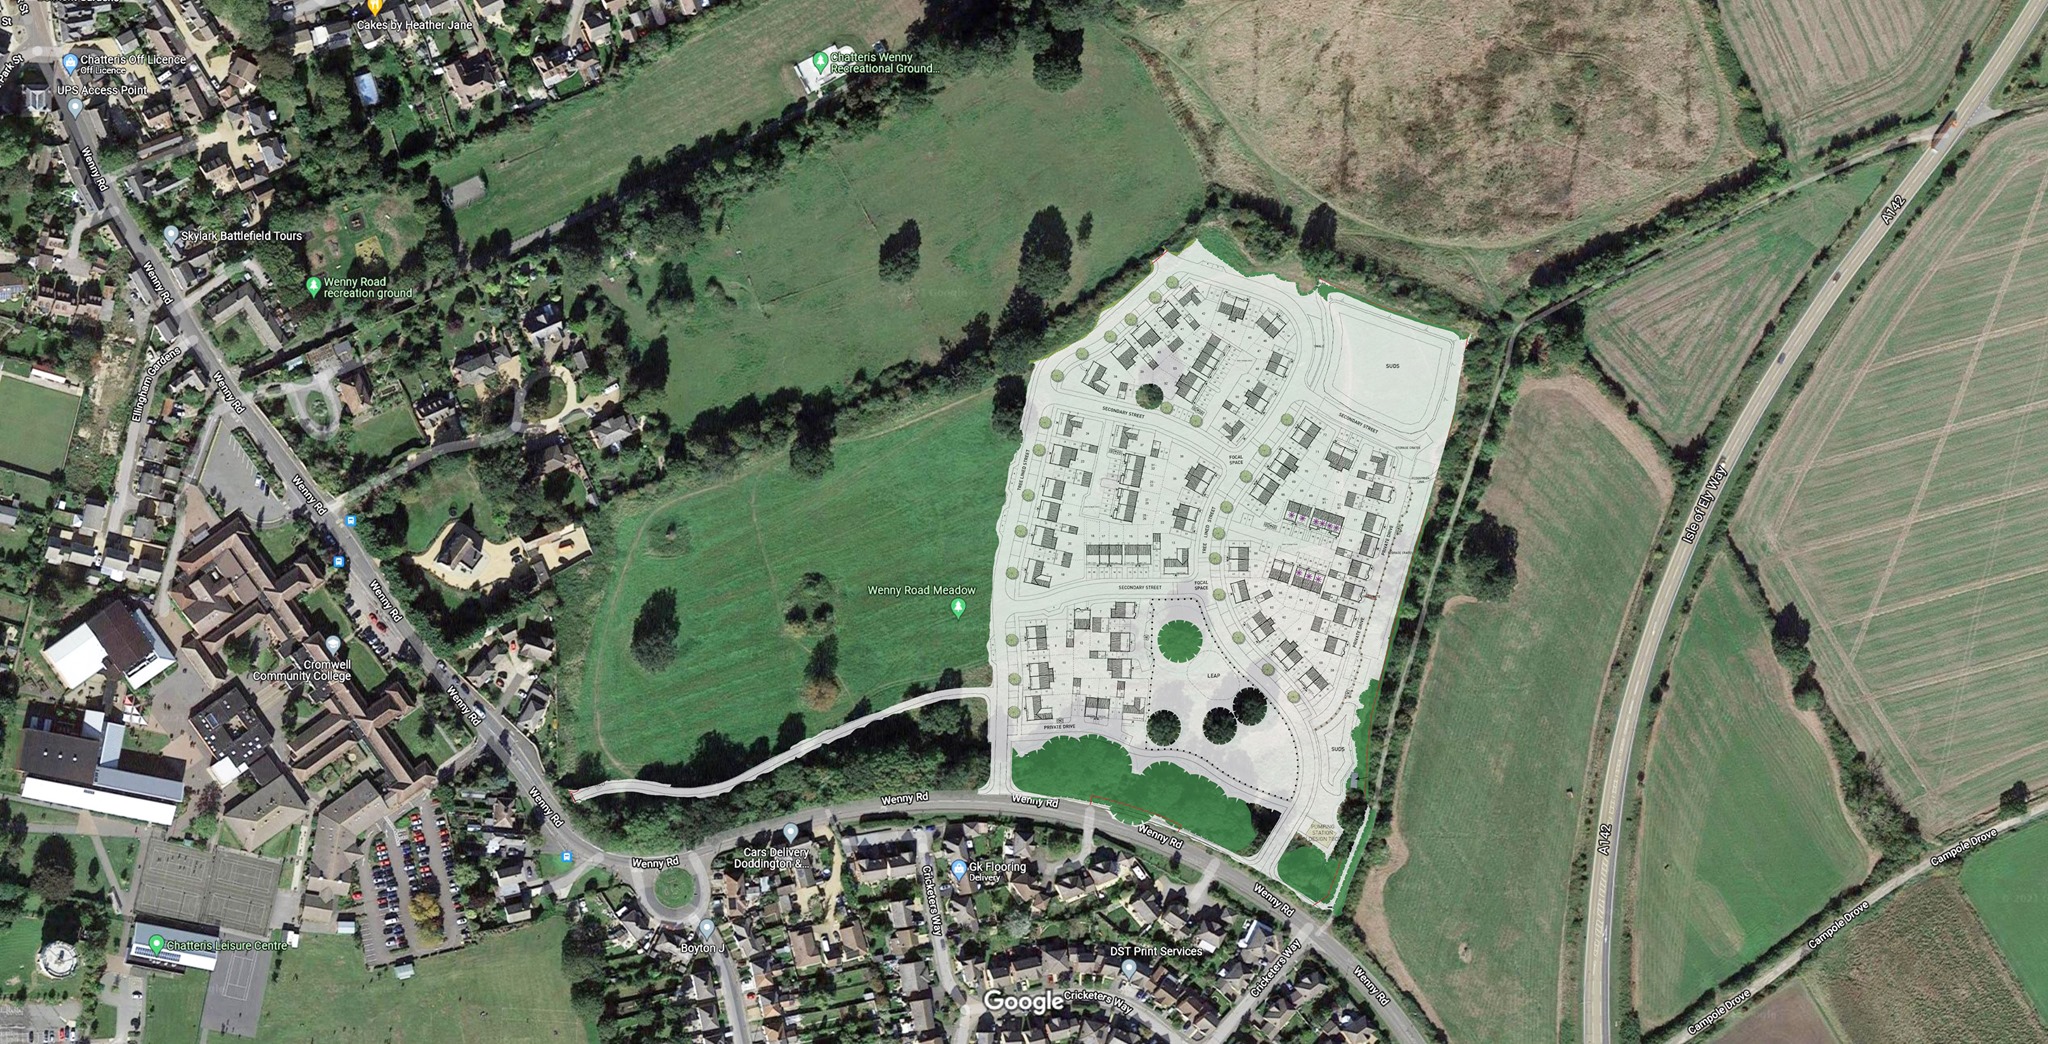 The development plan overlayed against the aerial view of the site